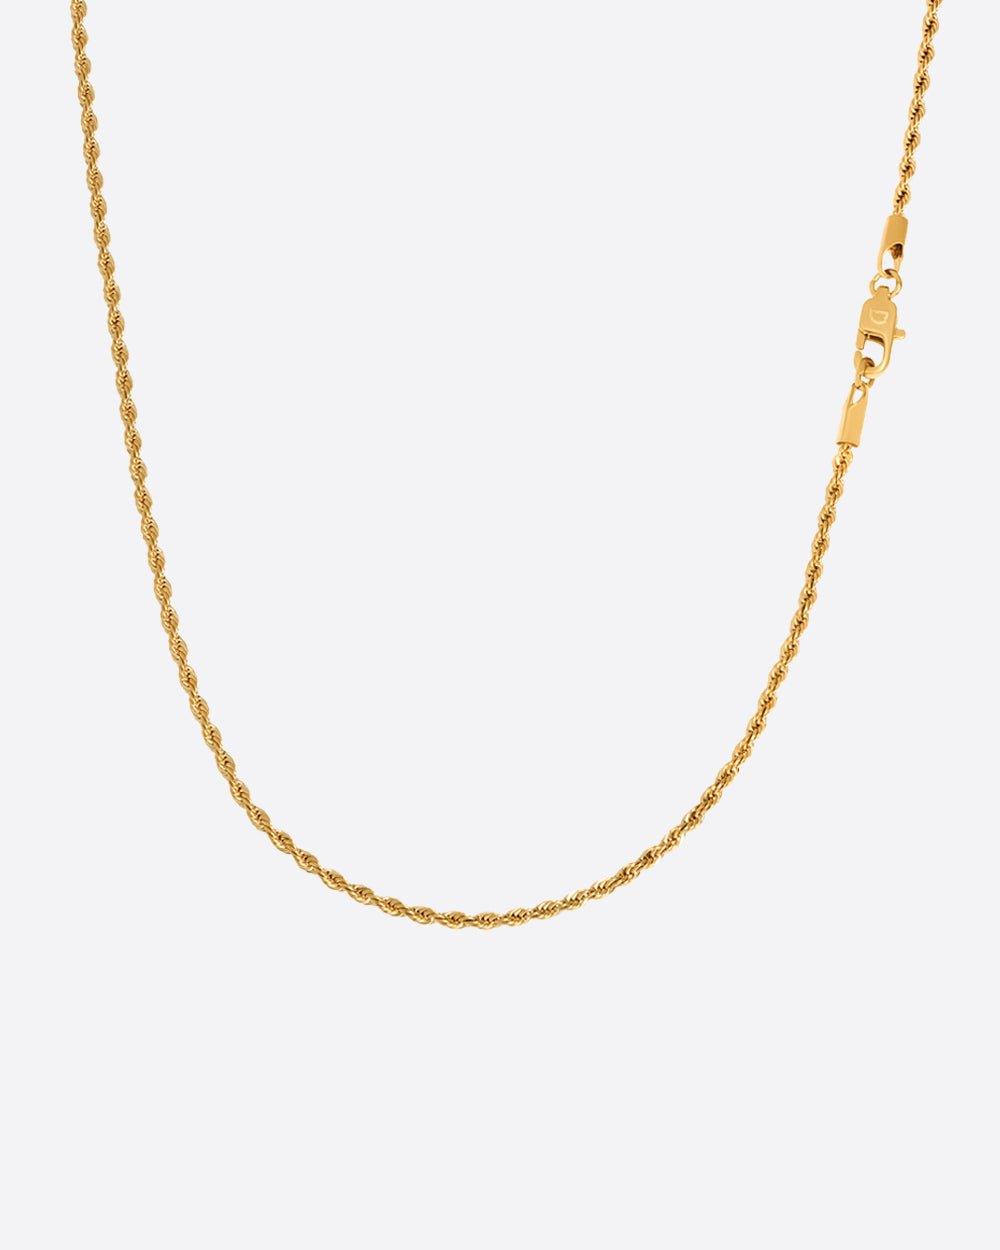 CLEAN ROPE CHAIN. - 2MM 18K GOLD - DRIP IN THE JEWEL